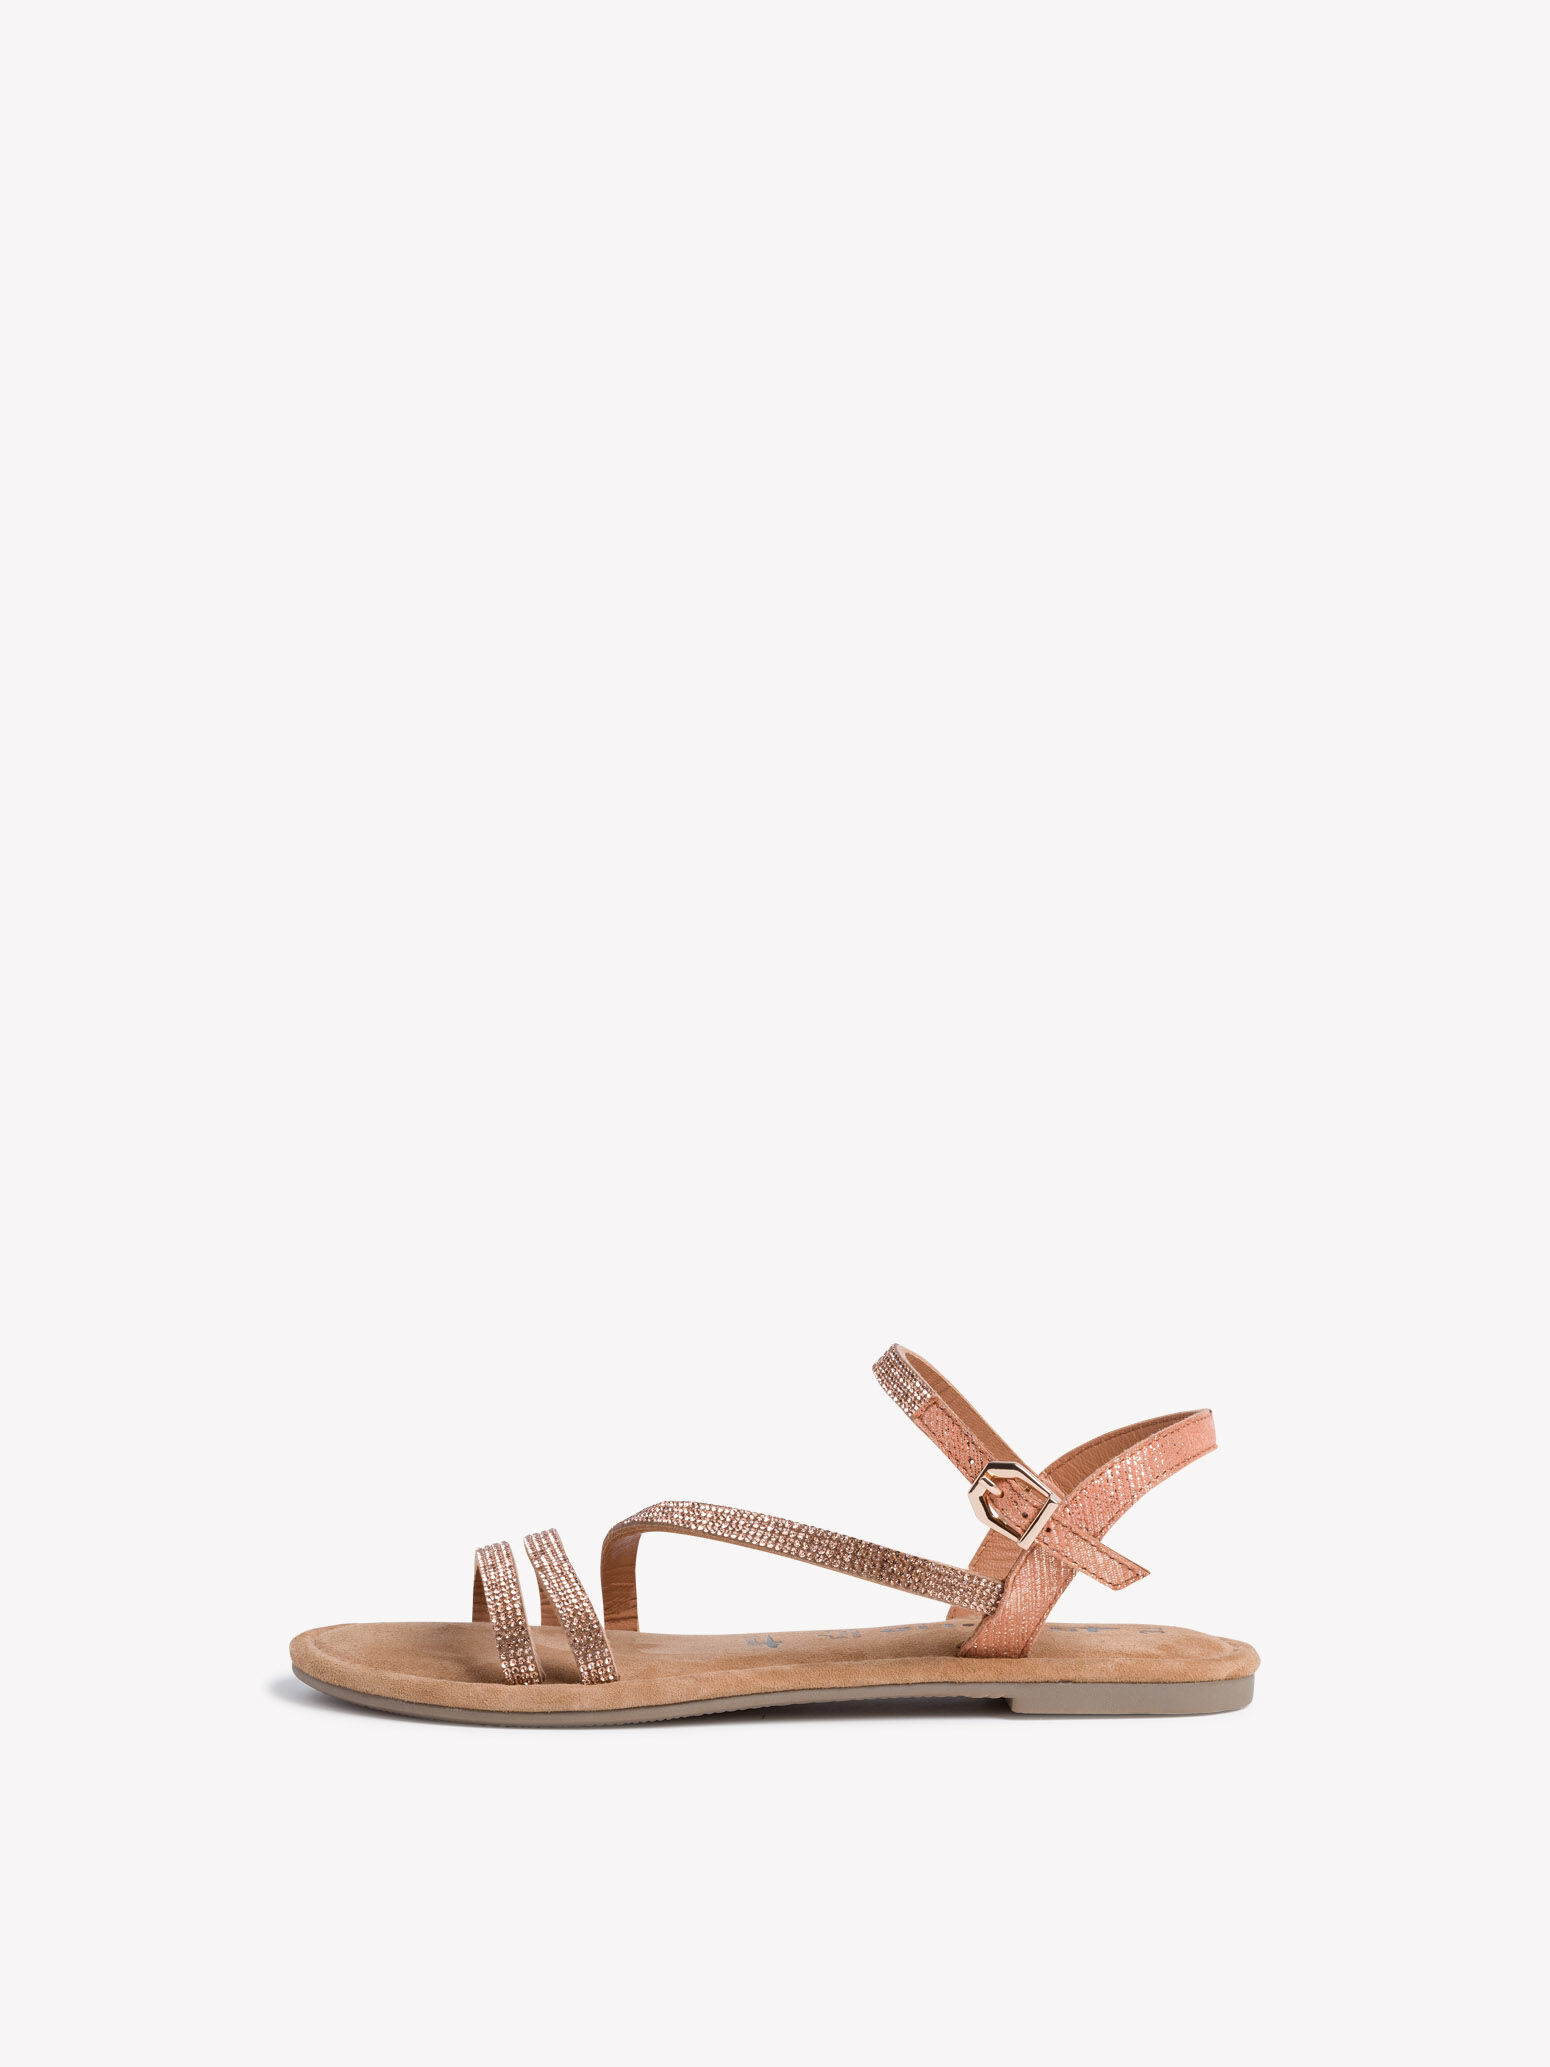 copper sandals for sale